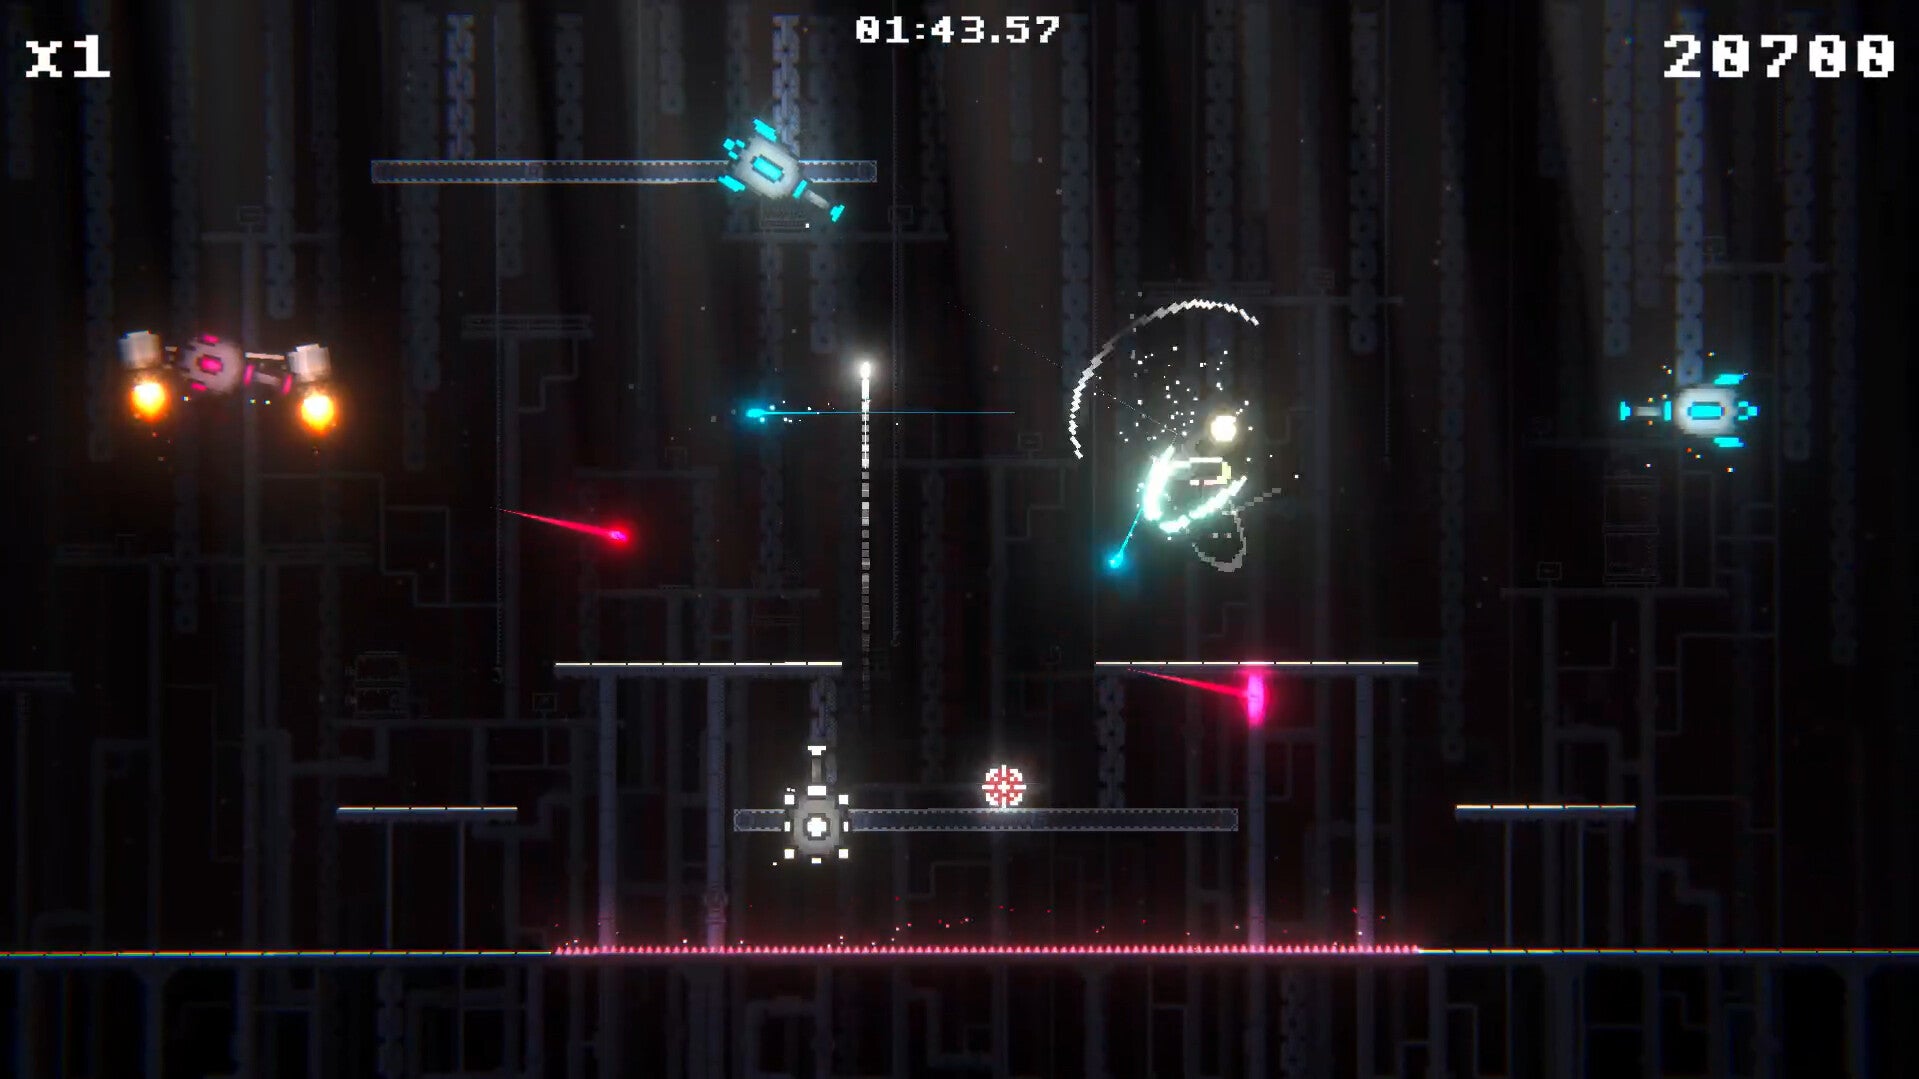 Parrying bullets with a katana in cyberspace in an Agent In Depth screenshot.